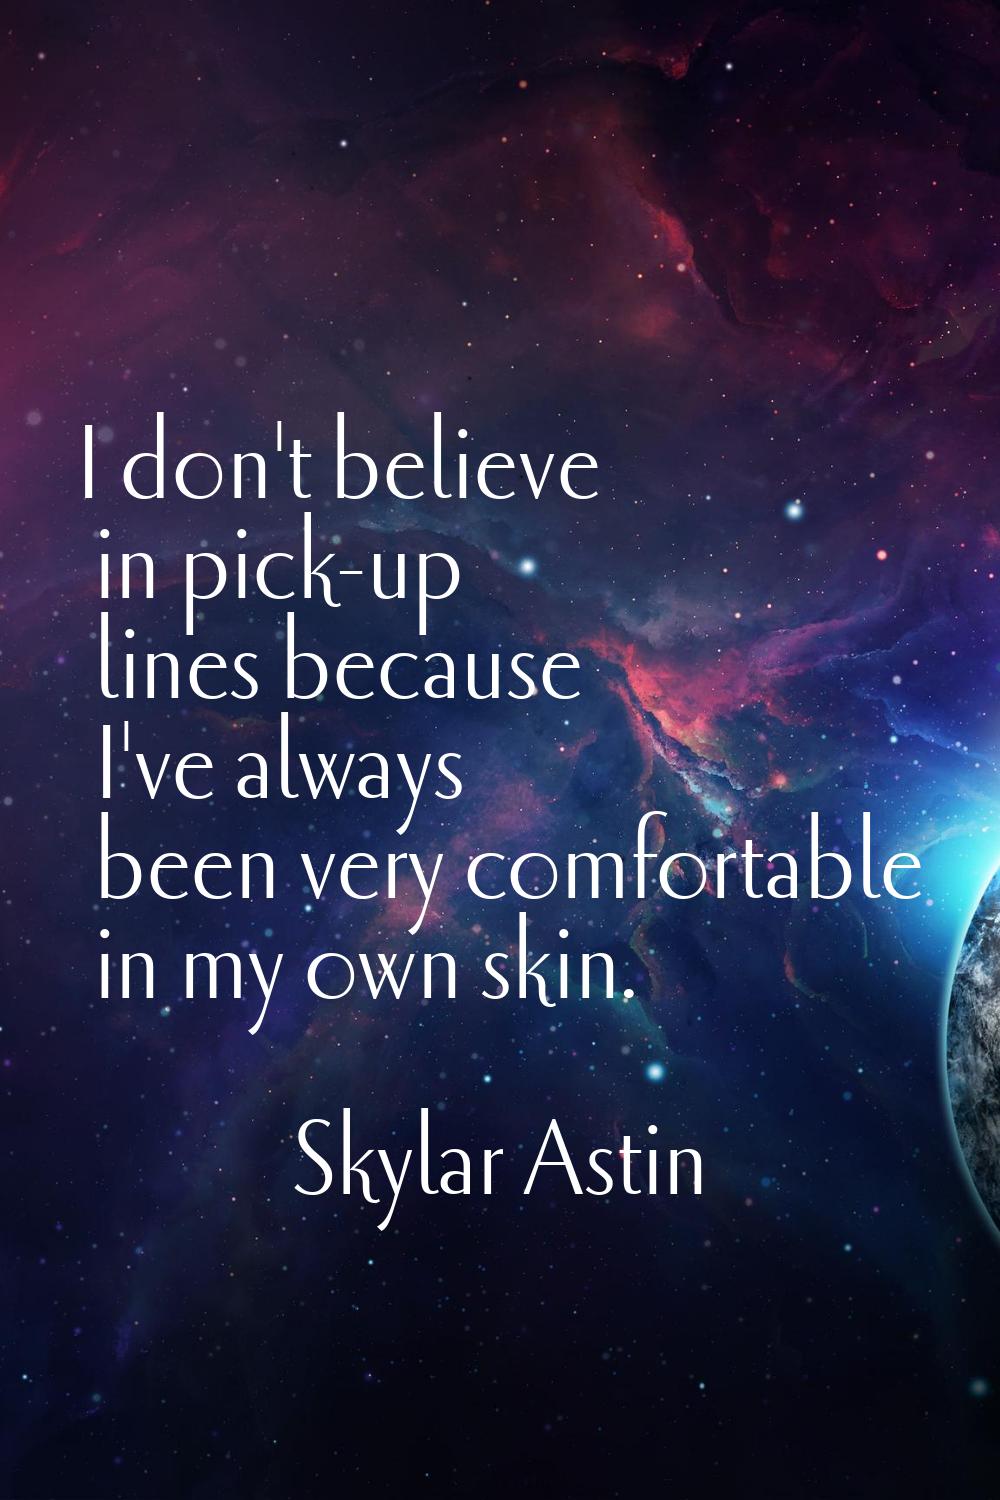 I don't believe in pick-up lines because I've always been very comfortable in my own skin.